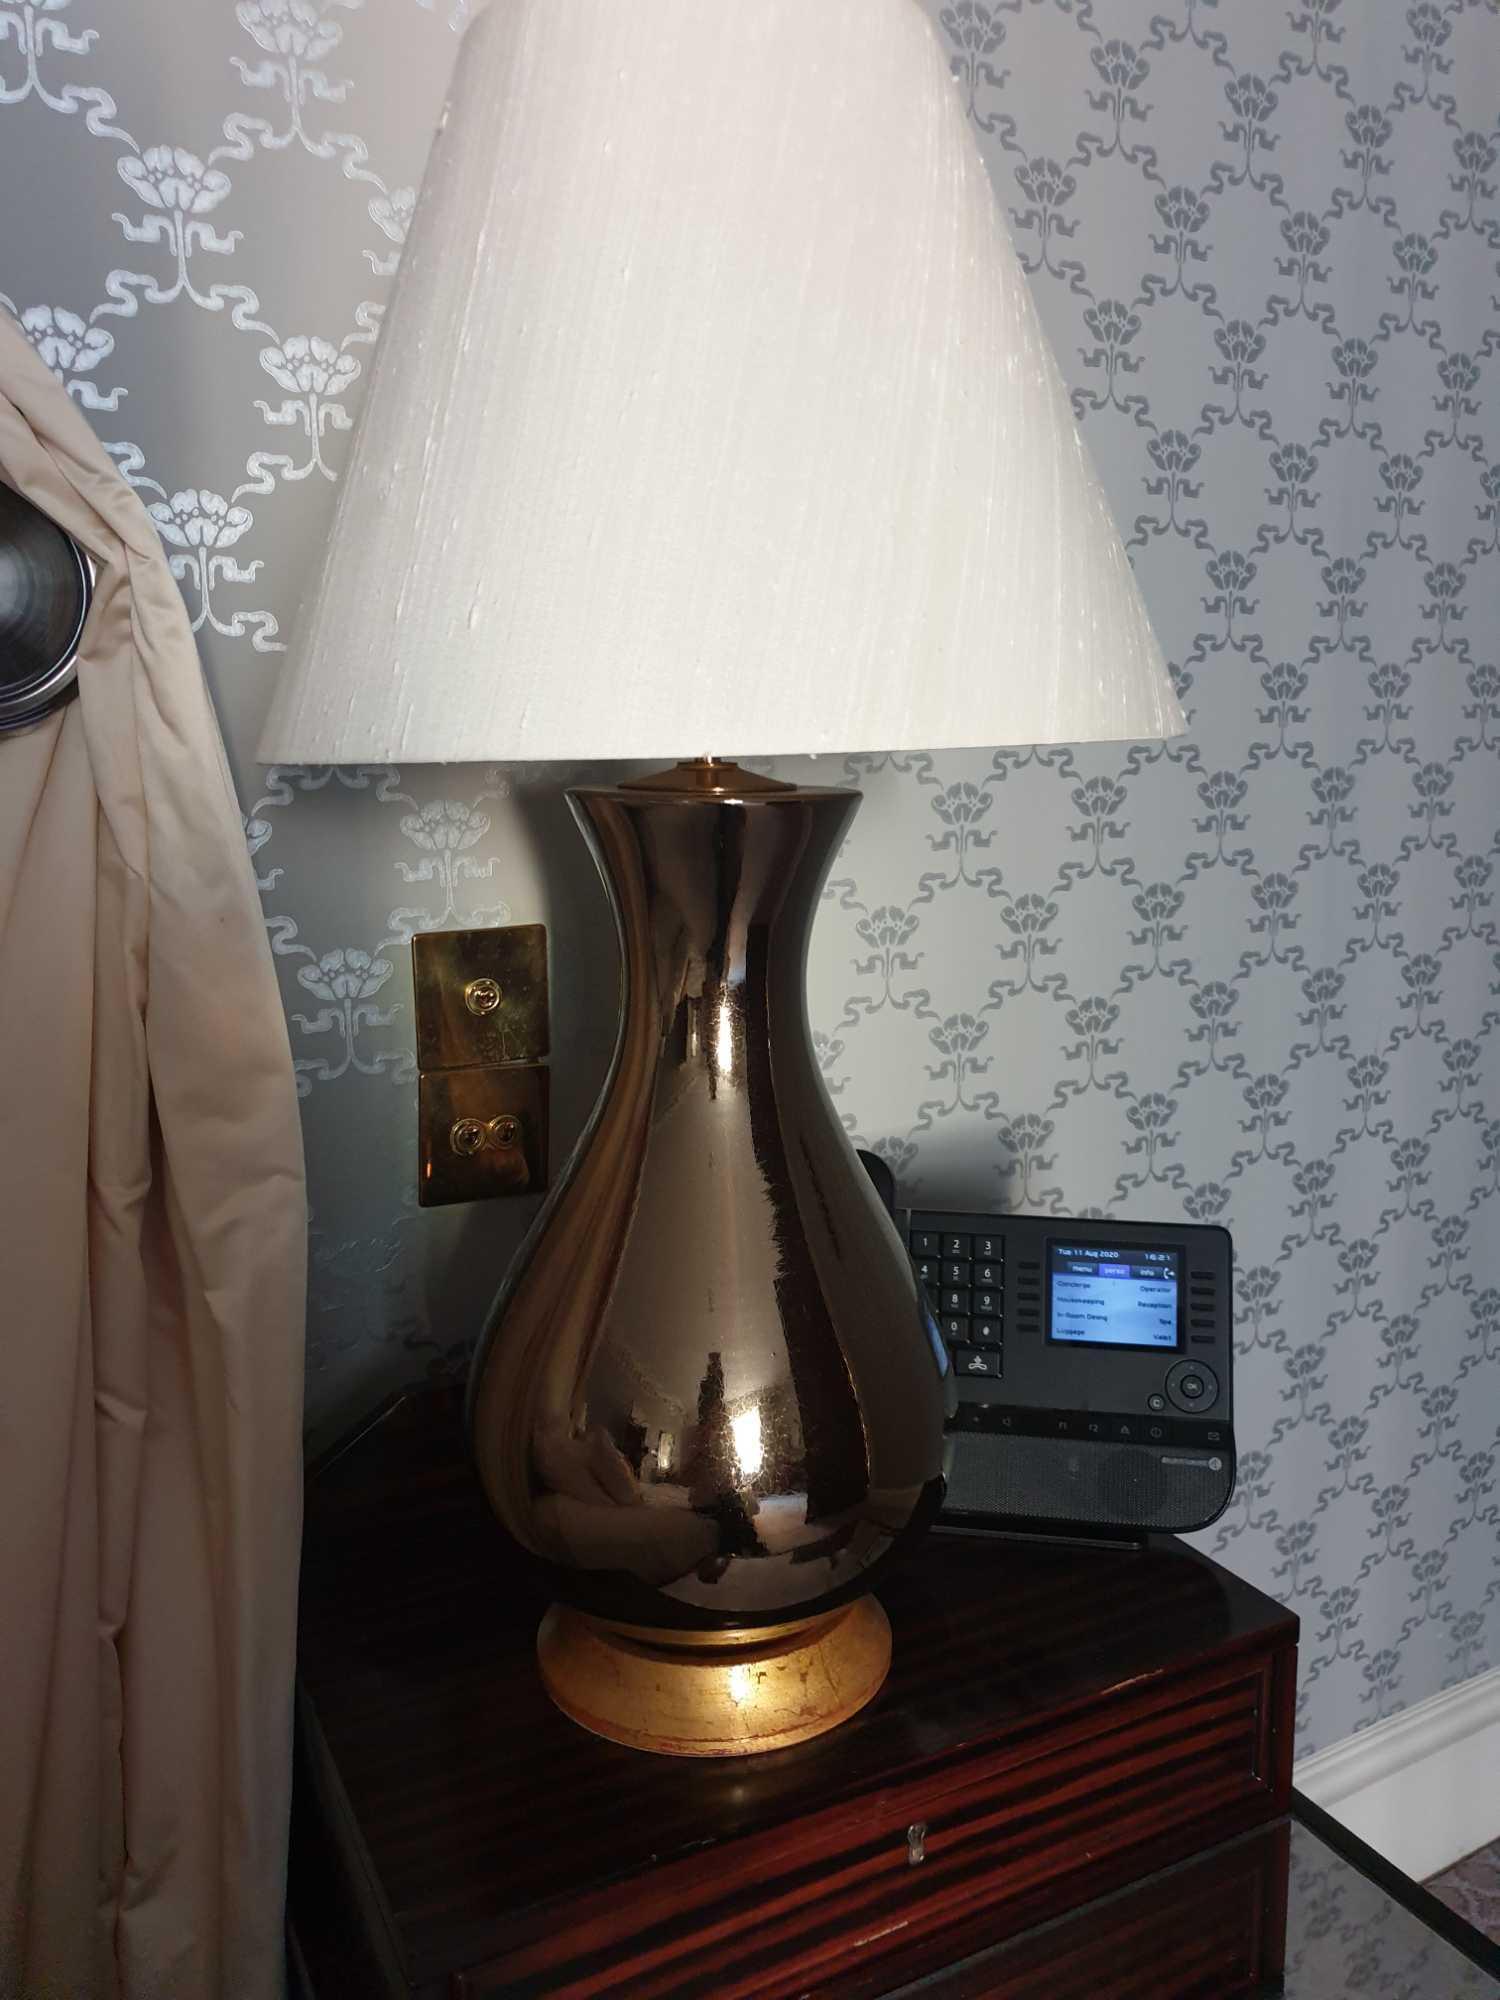 A Pair Of Heathfield And Co Louisa Glazed Ceramic Table Lamp With Textured Shade 77cm (Room 321)